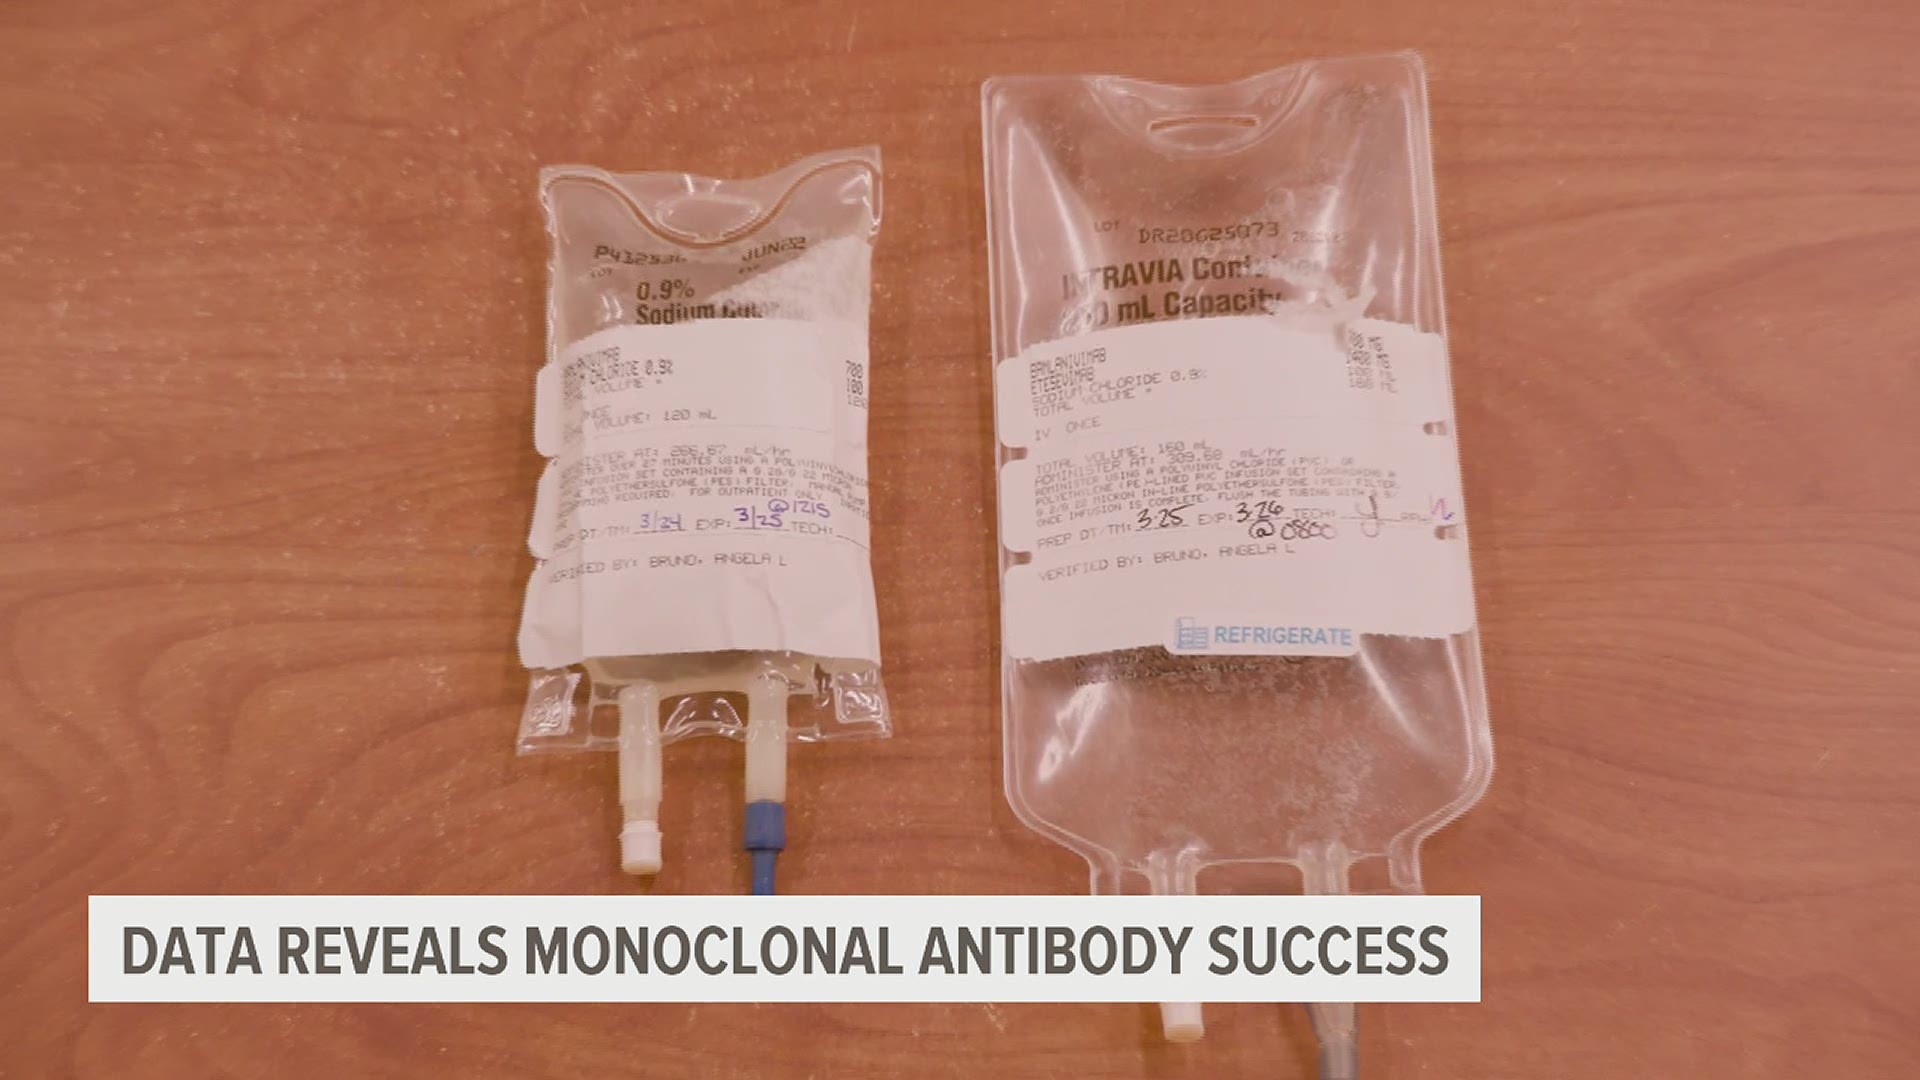 UPMC offers monoclonal antibody infusions at 16 sites in PA and New York, as well as home infusion services, if needed. Doctors say it's likely available at no cost.